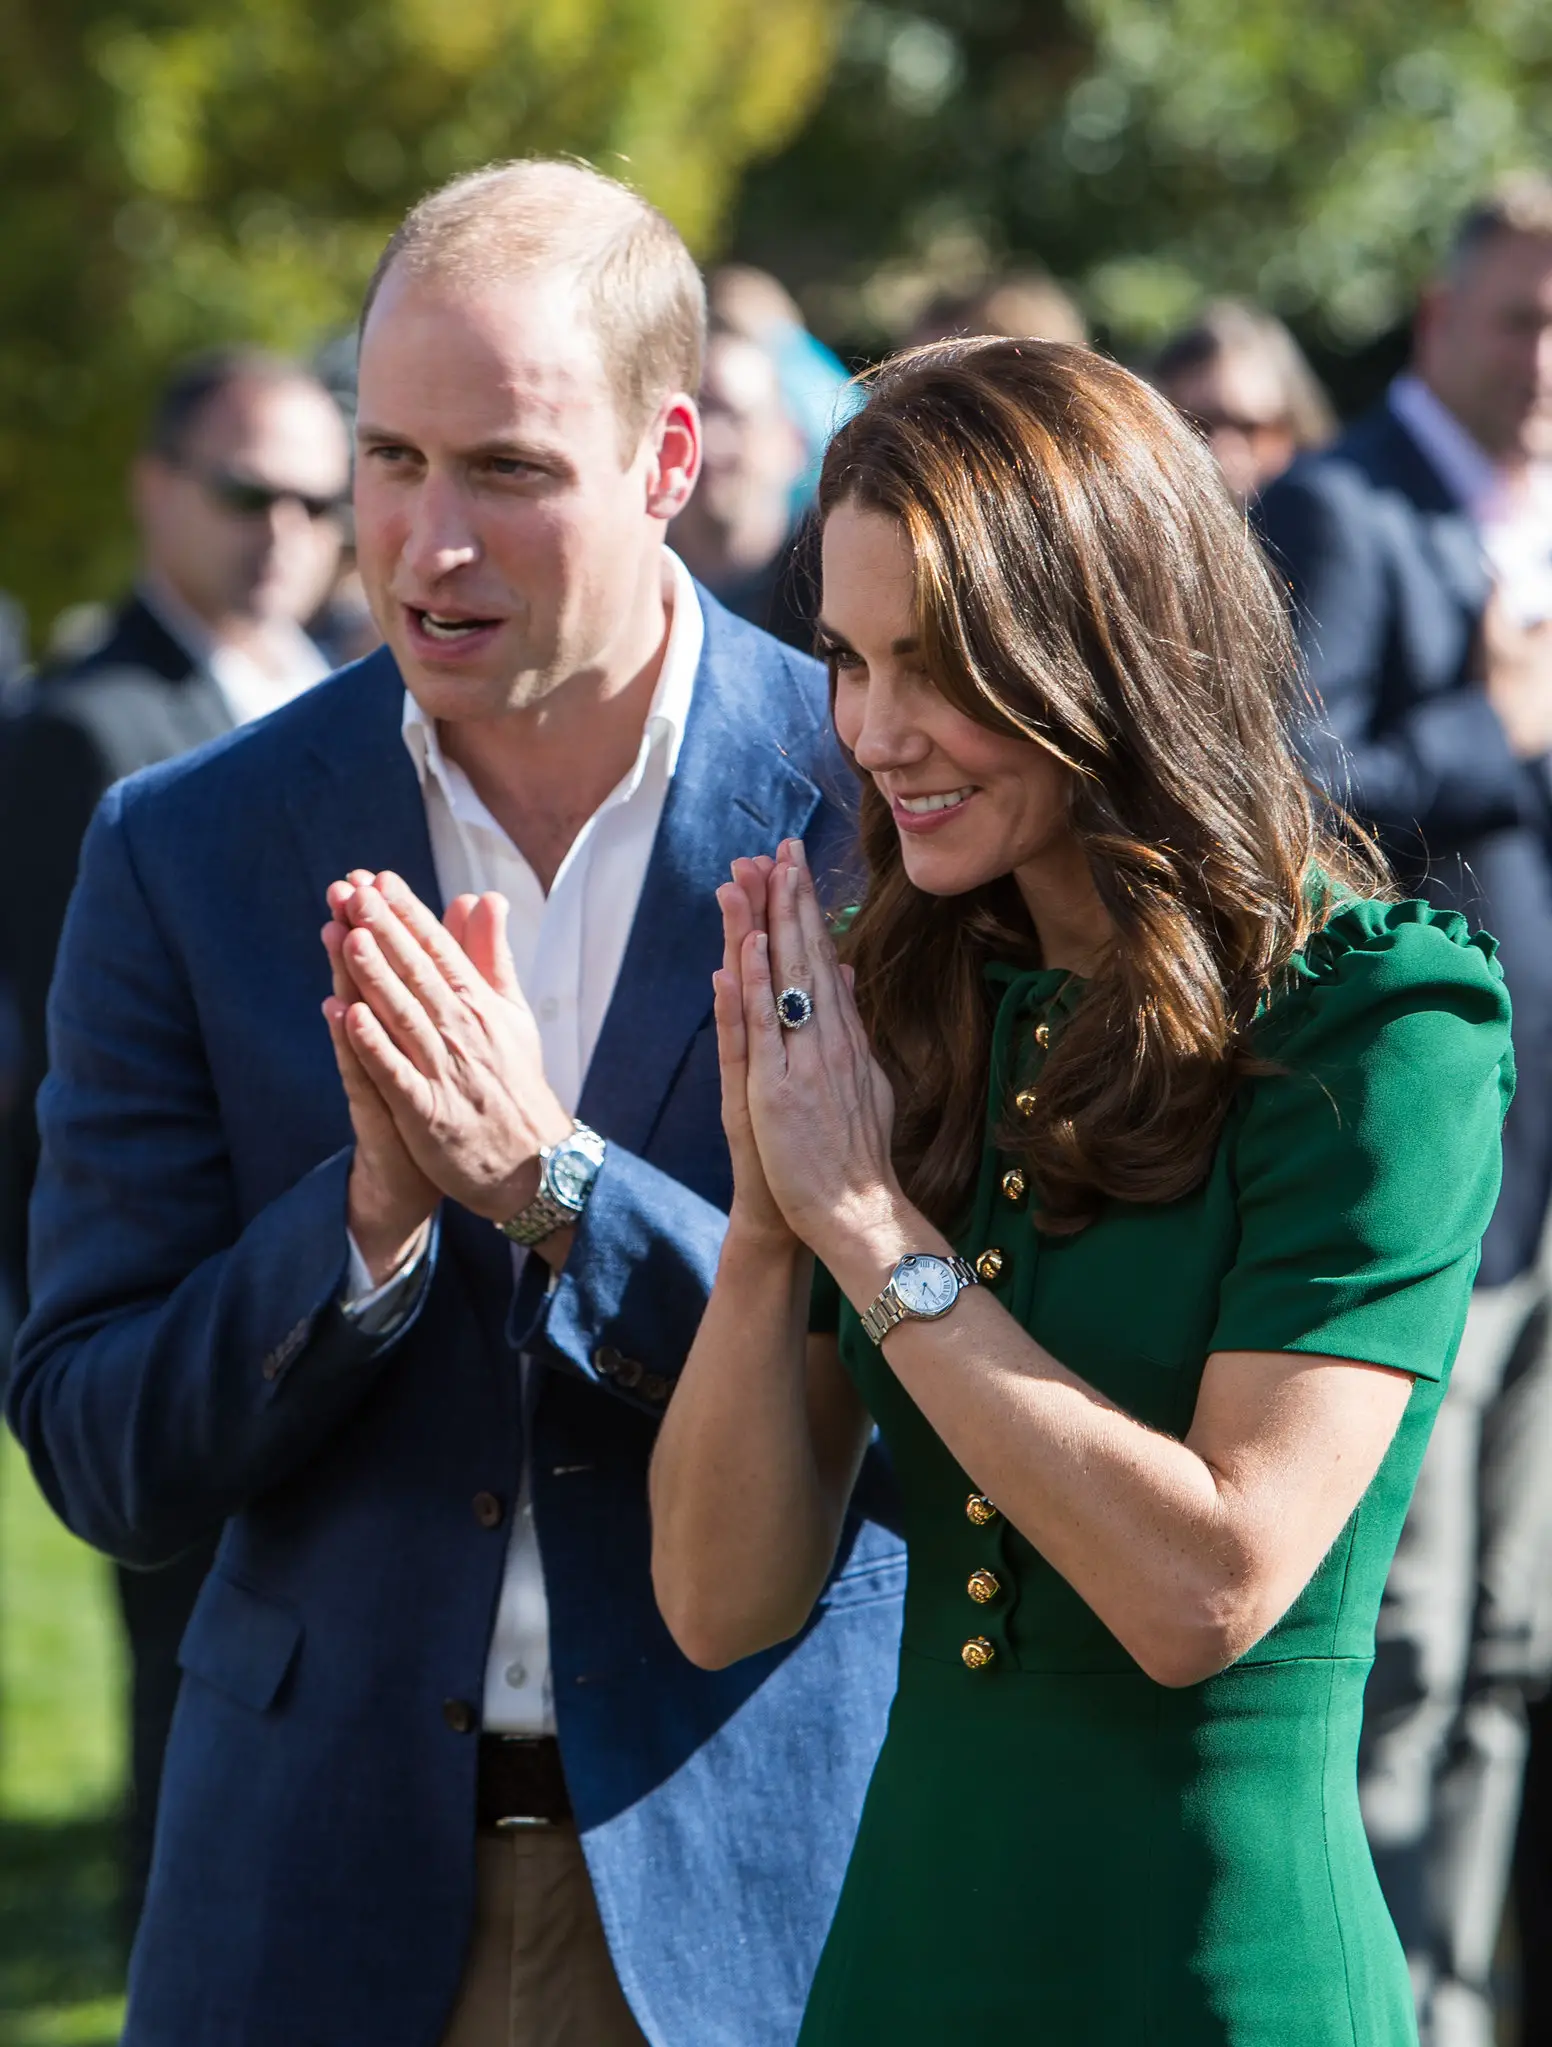 The Duke and Duchess of Cambridge at food festival in kelowna